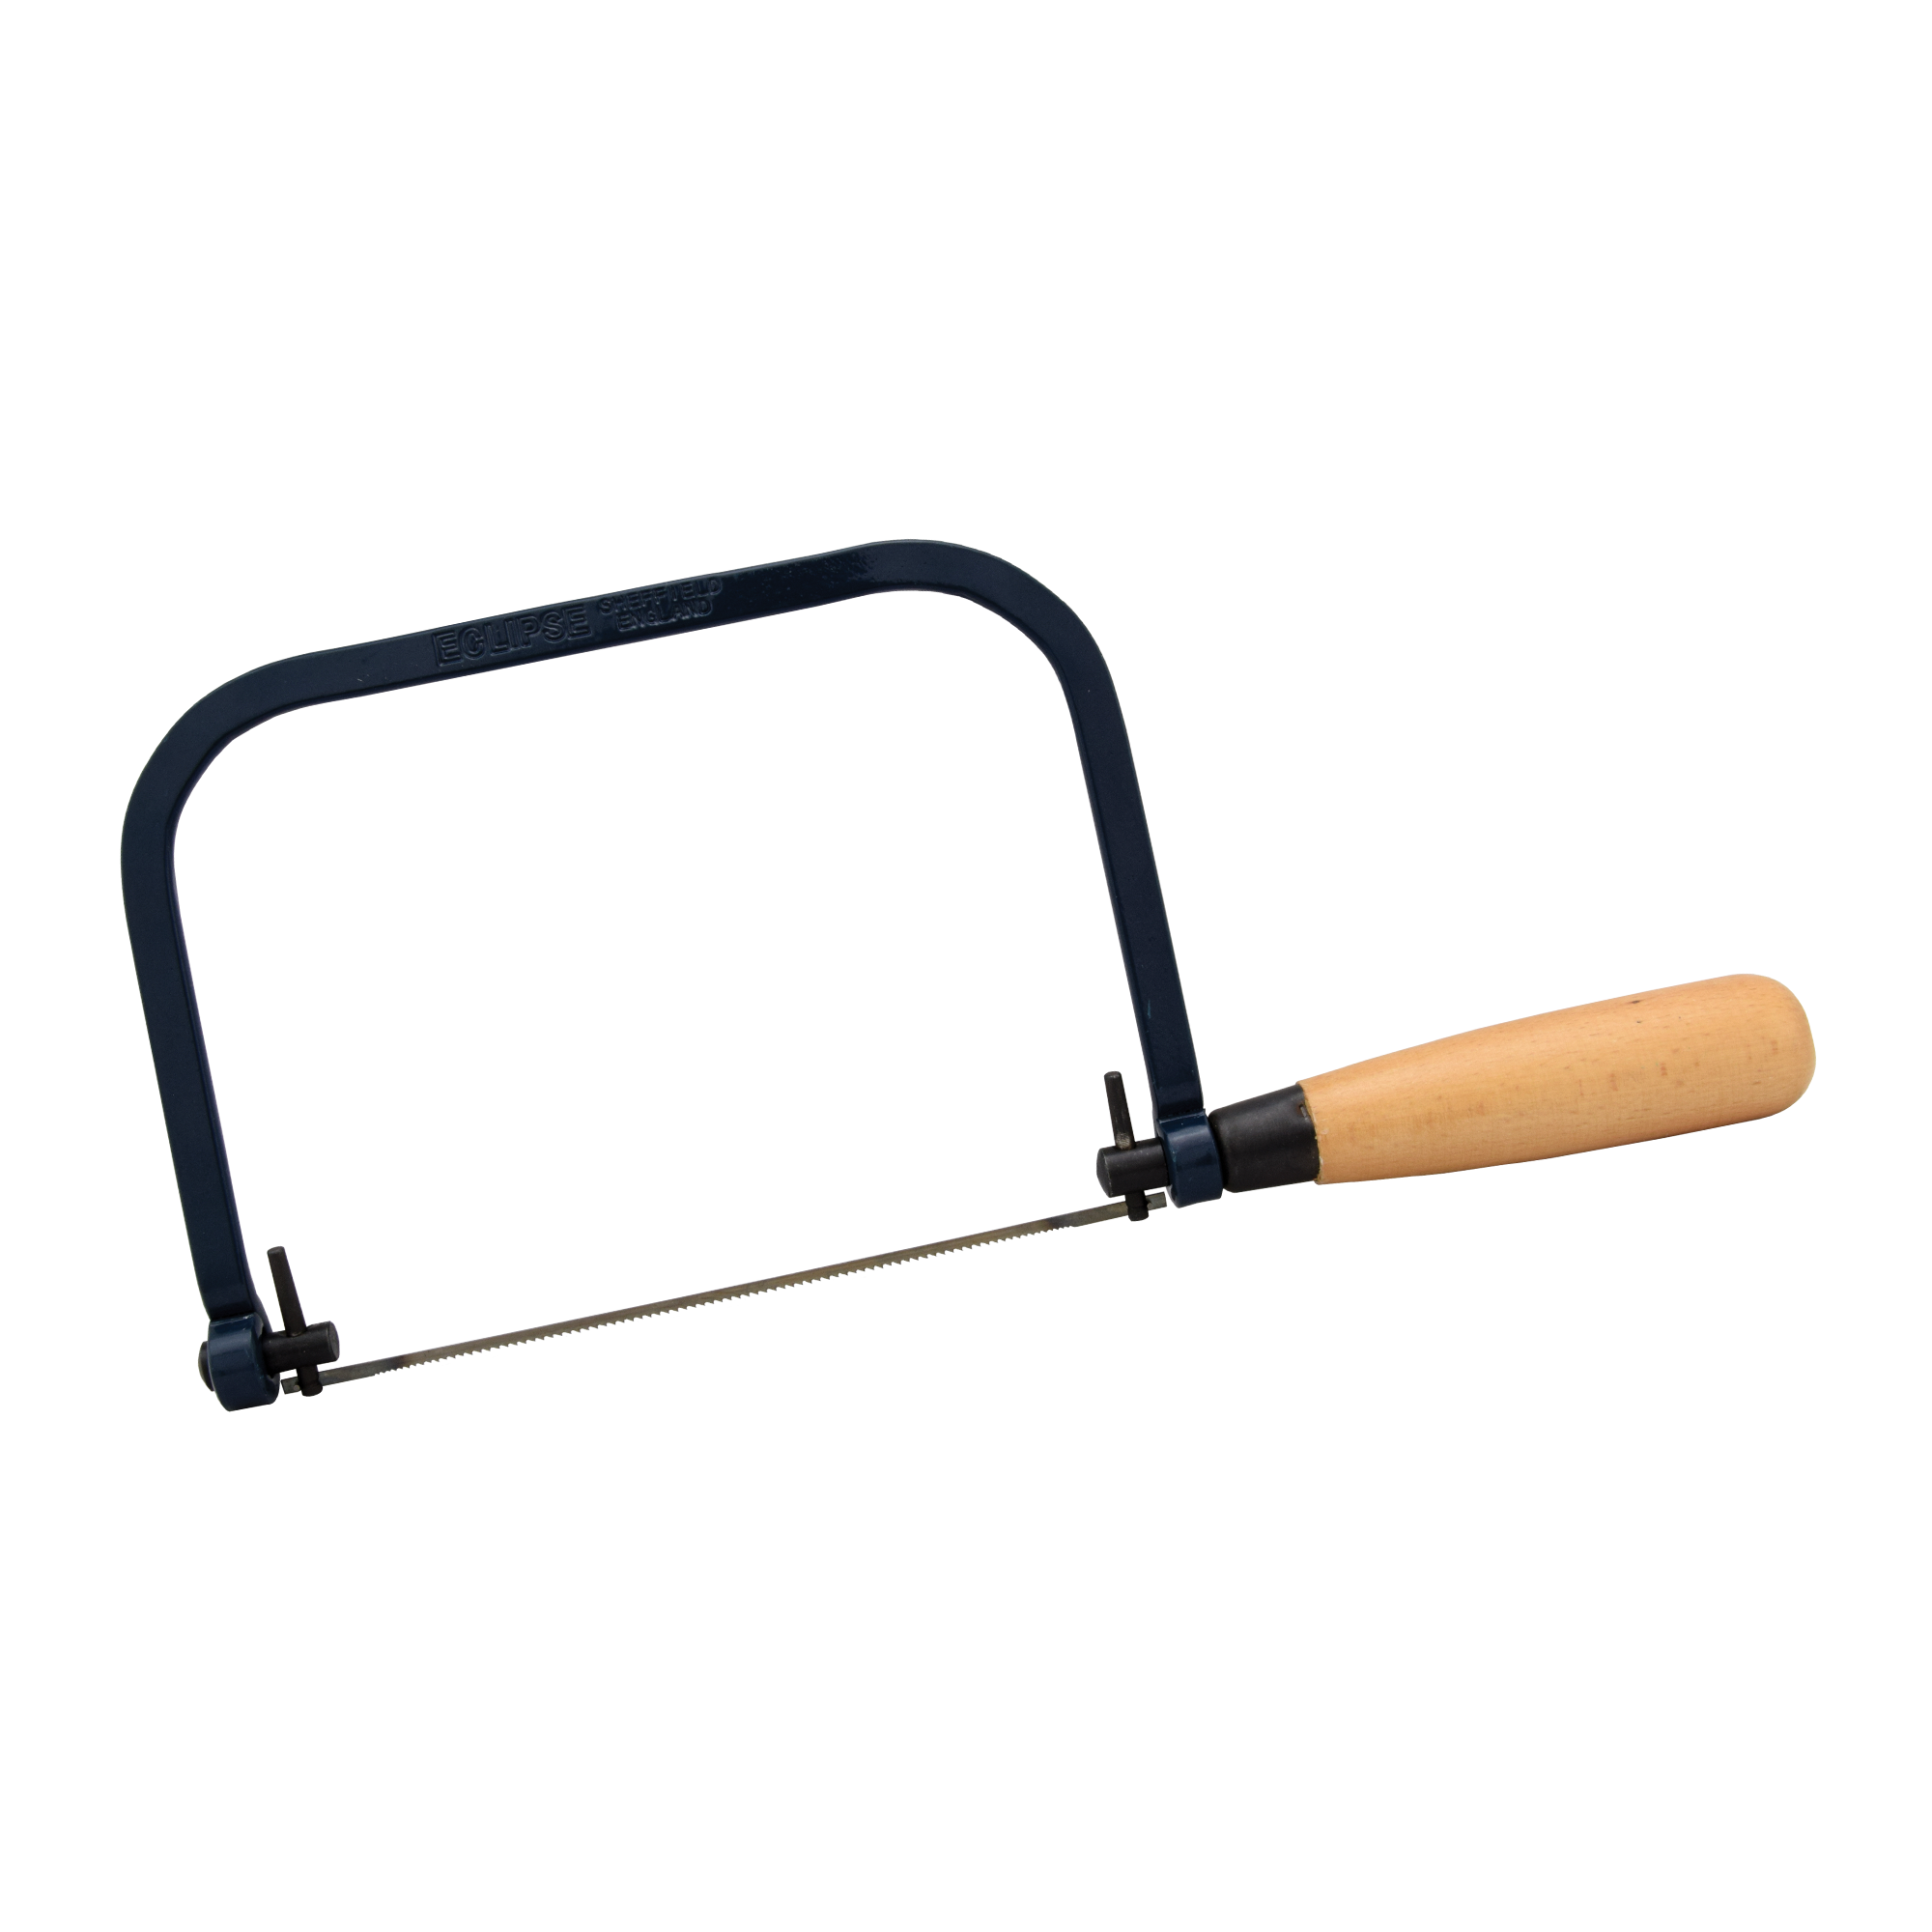 270mm Coping Saw with Wooden Handle SJ-7CP by Eclipse